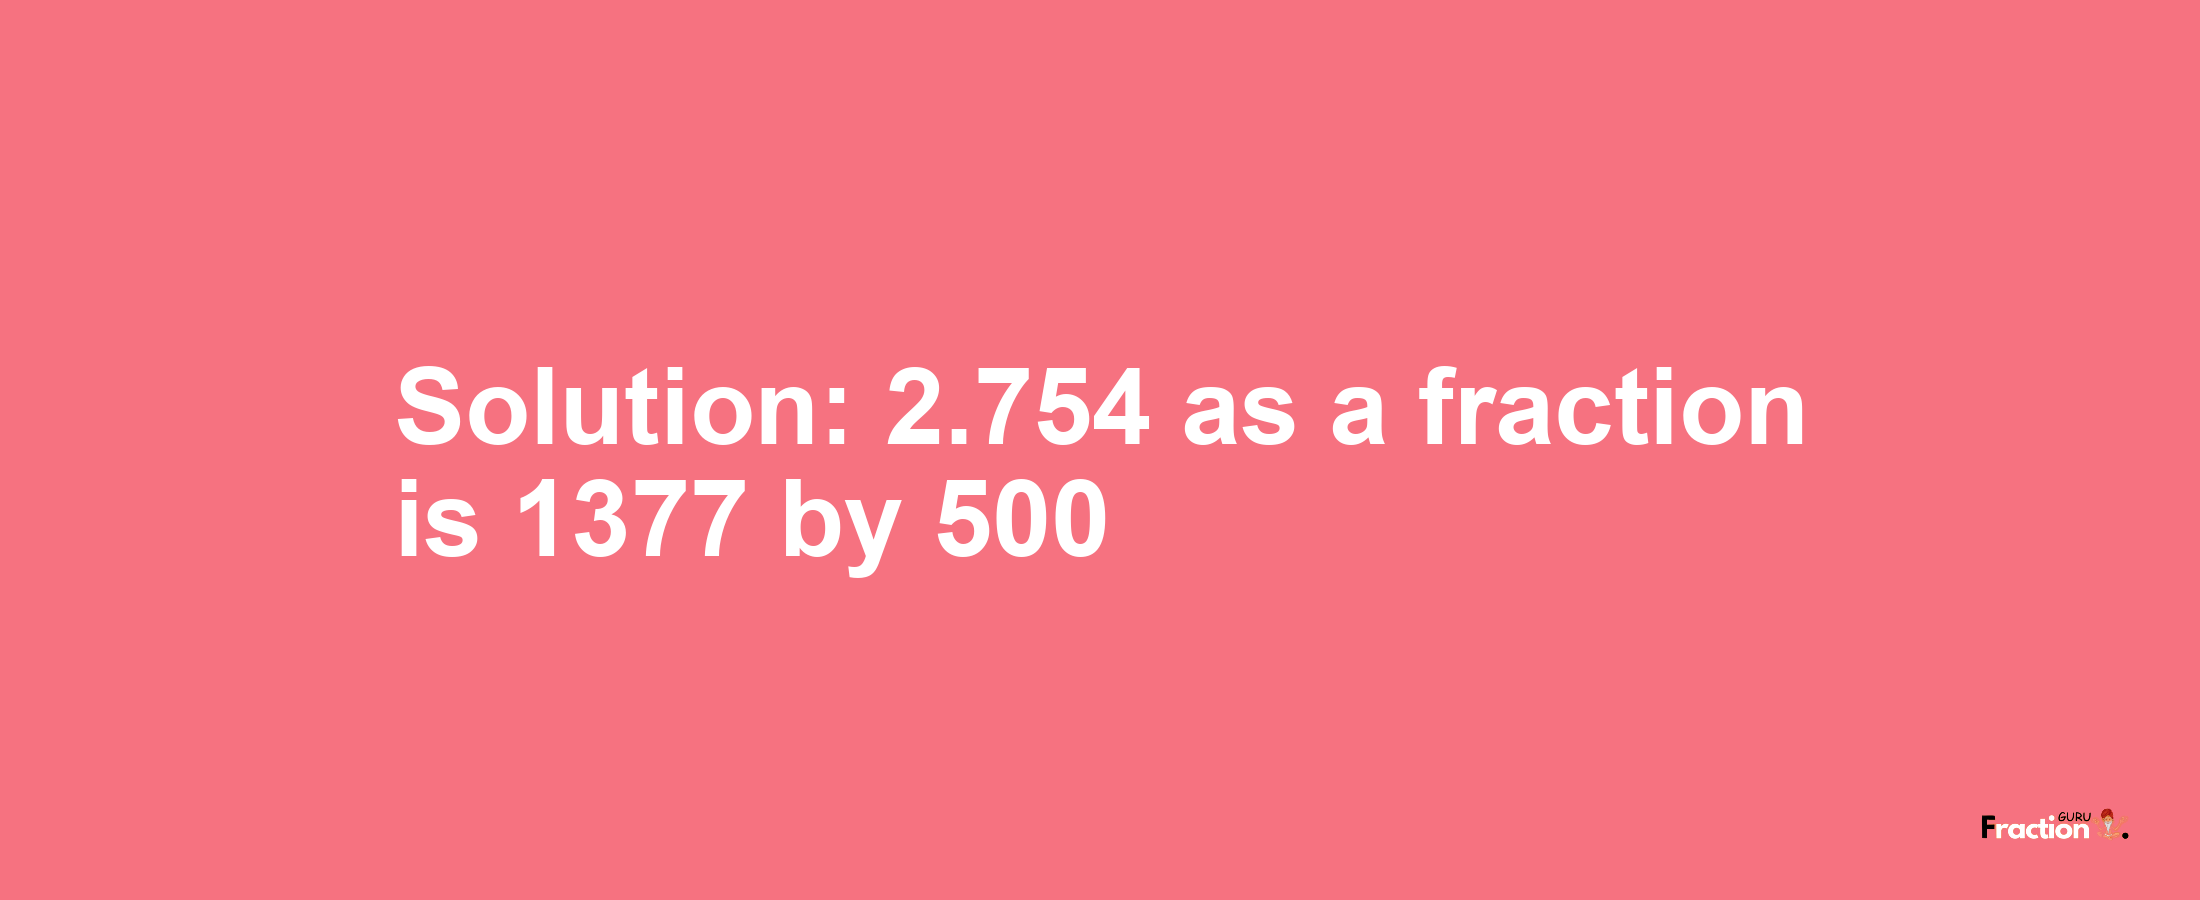 Solution:2.754 as a fraction is 1377/500